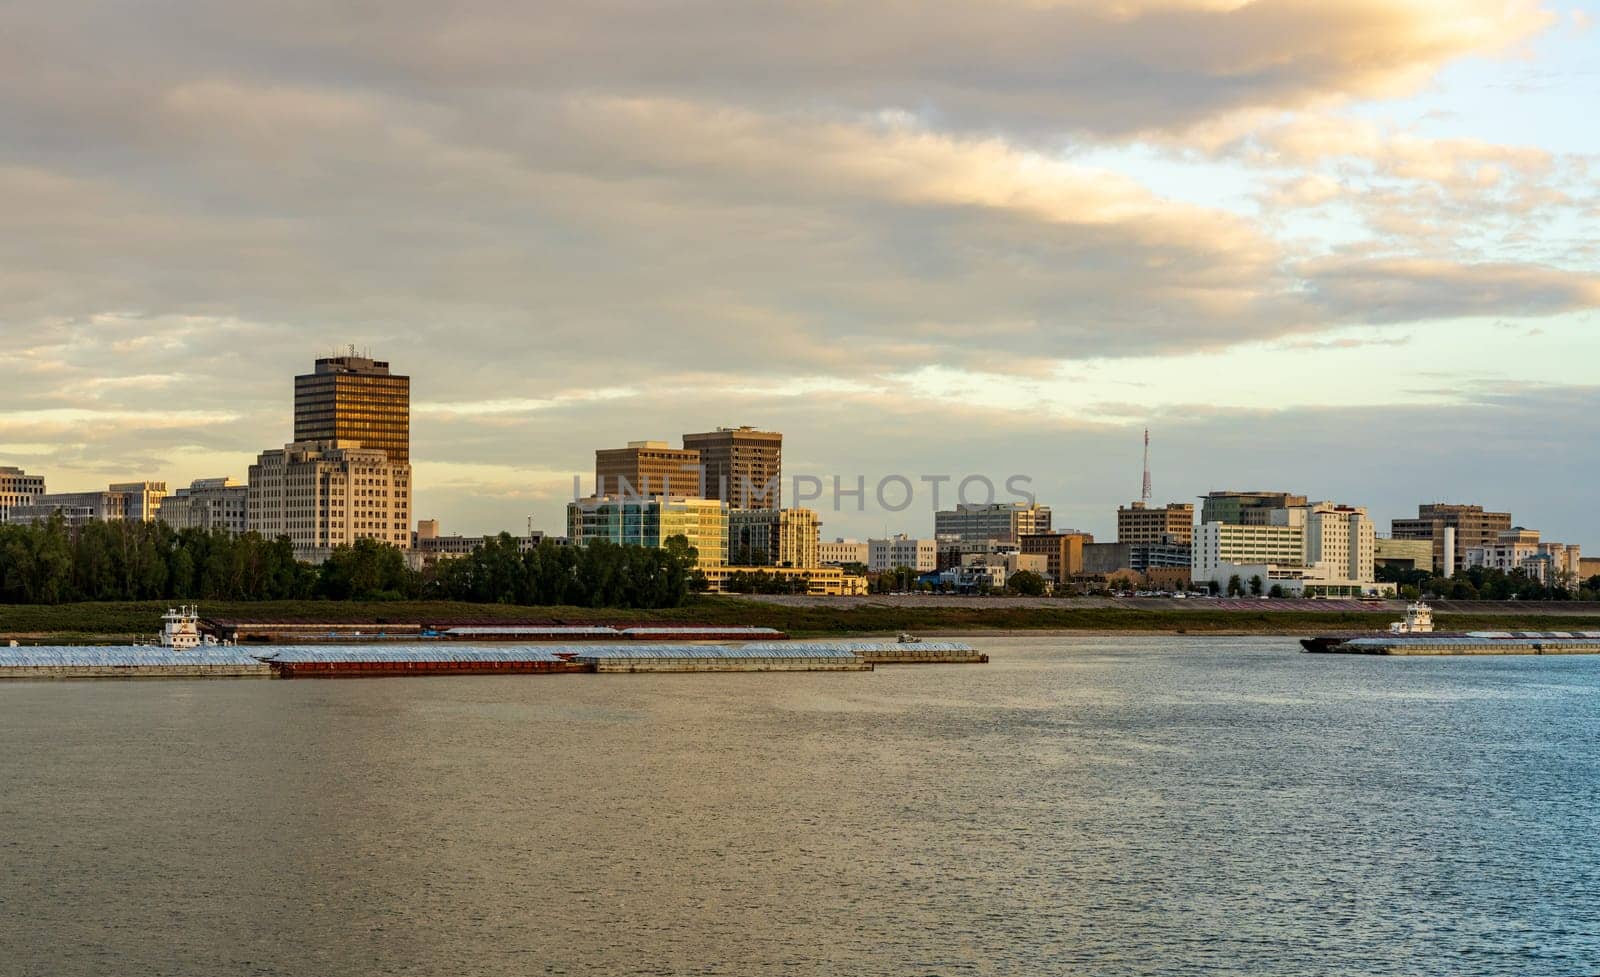 Skyline of Baton Rouge at sunset over river barges by steheap